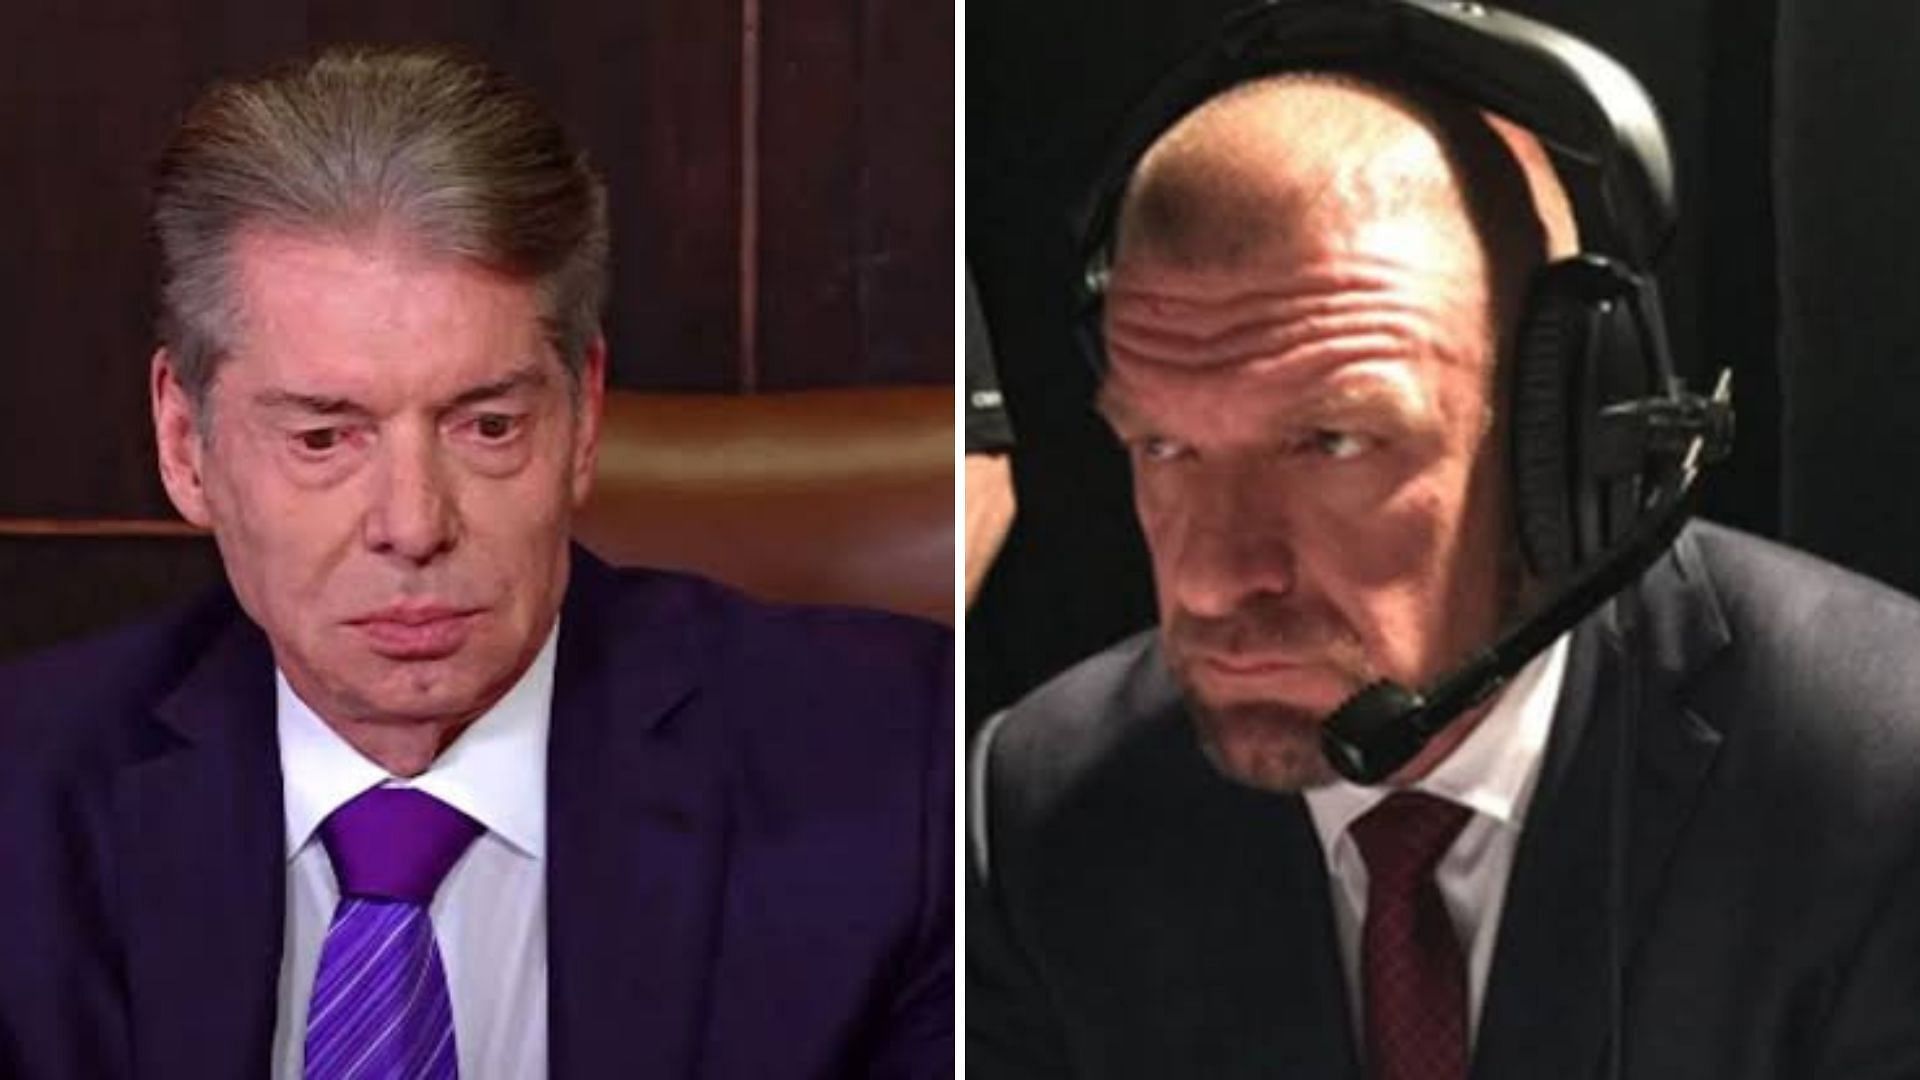 Triple H took over creative reigns from Vince McMahon last year.